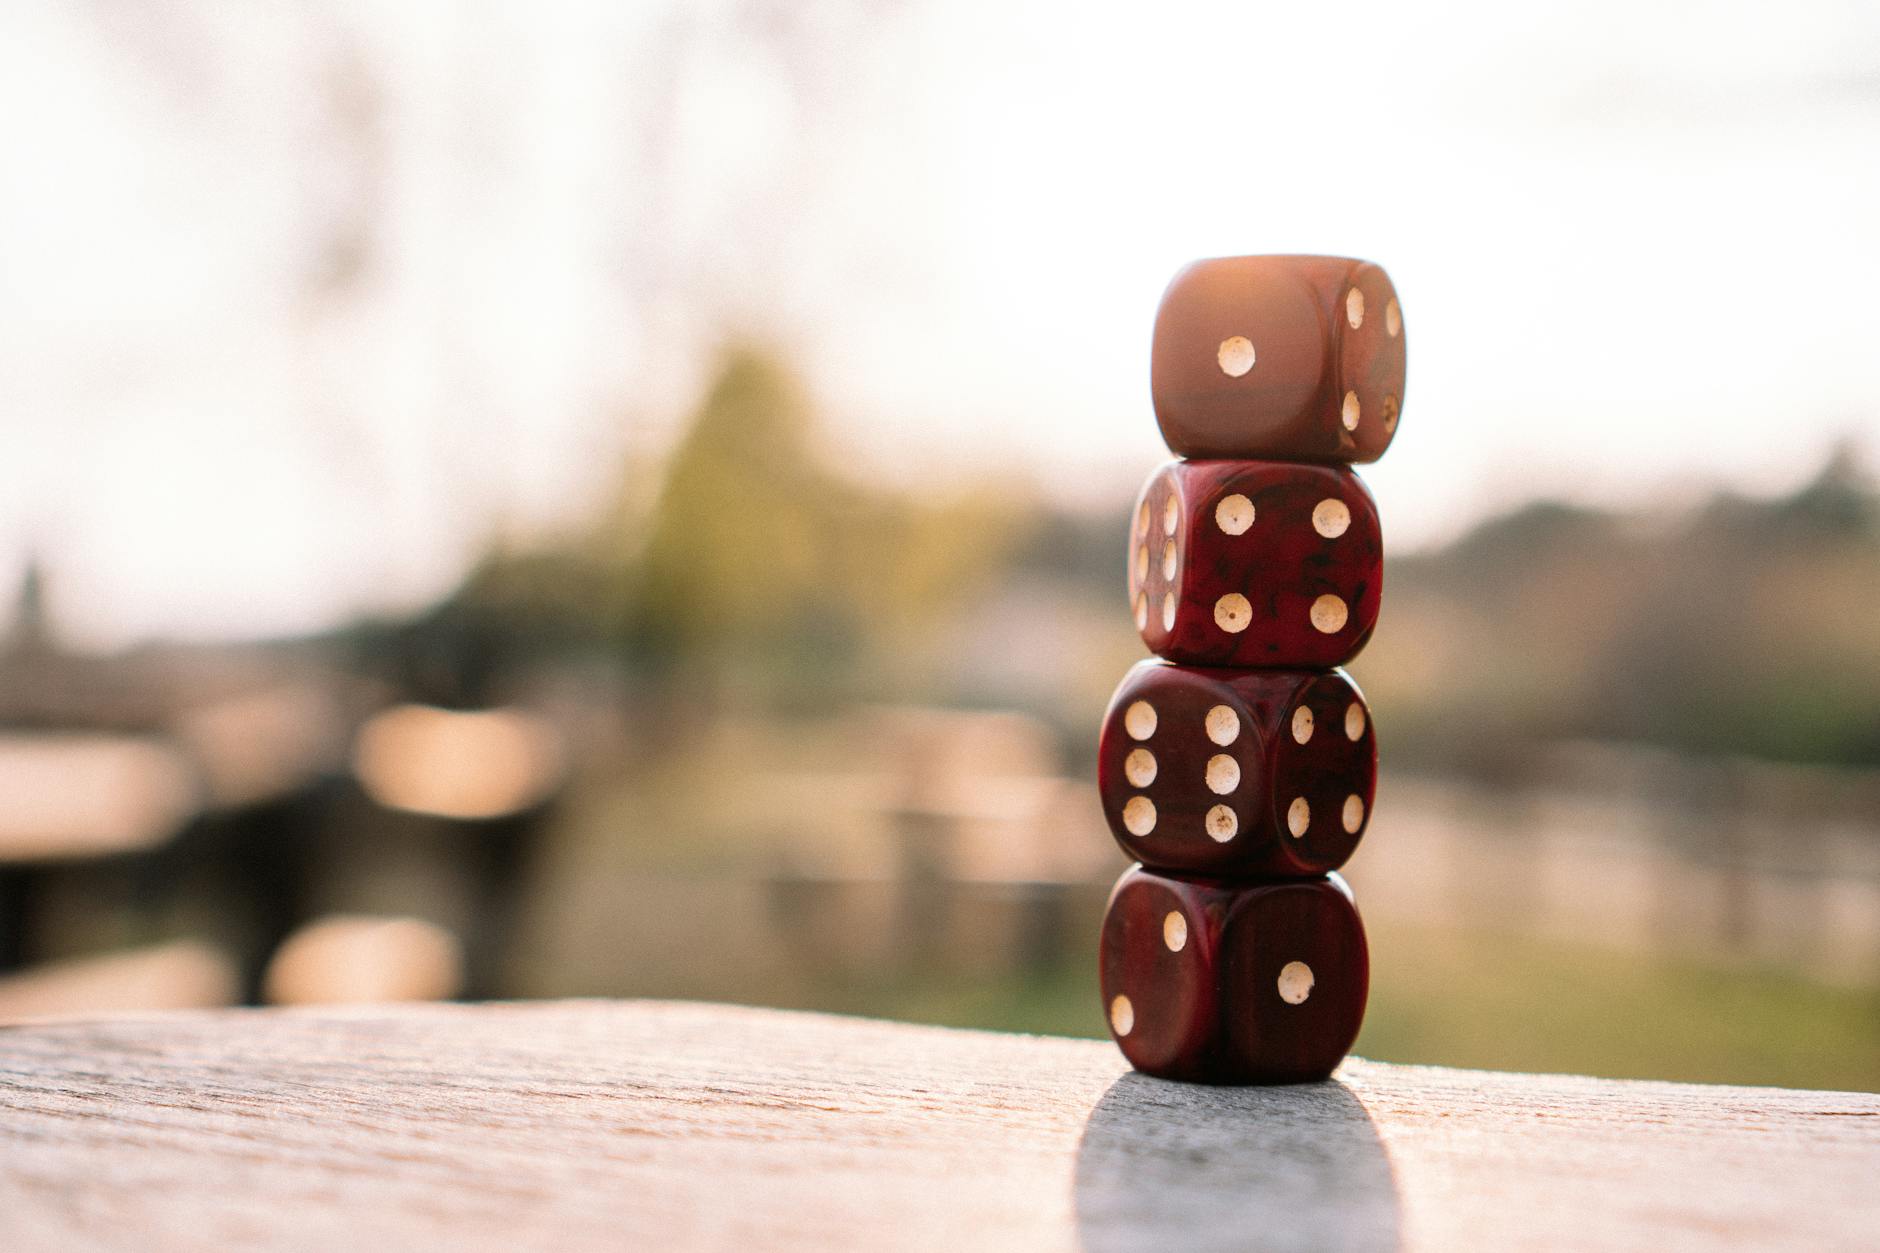 Set of red dice stacked together on wooden table